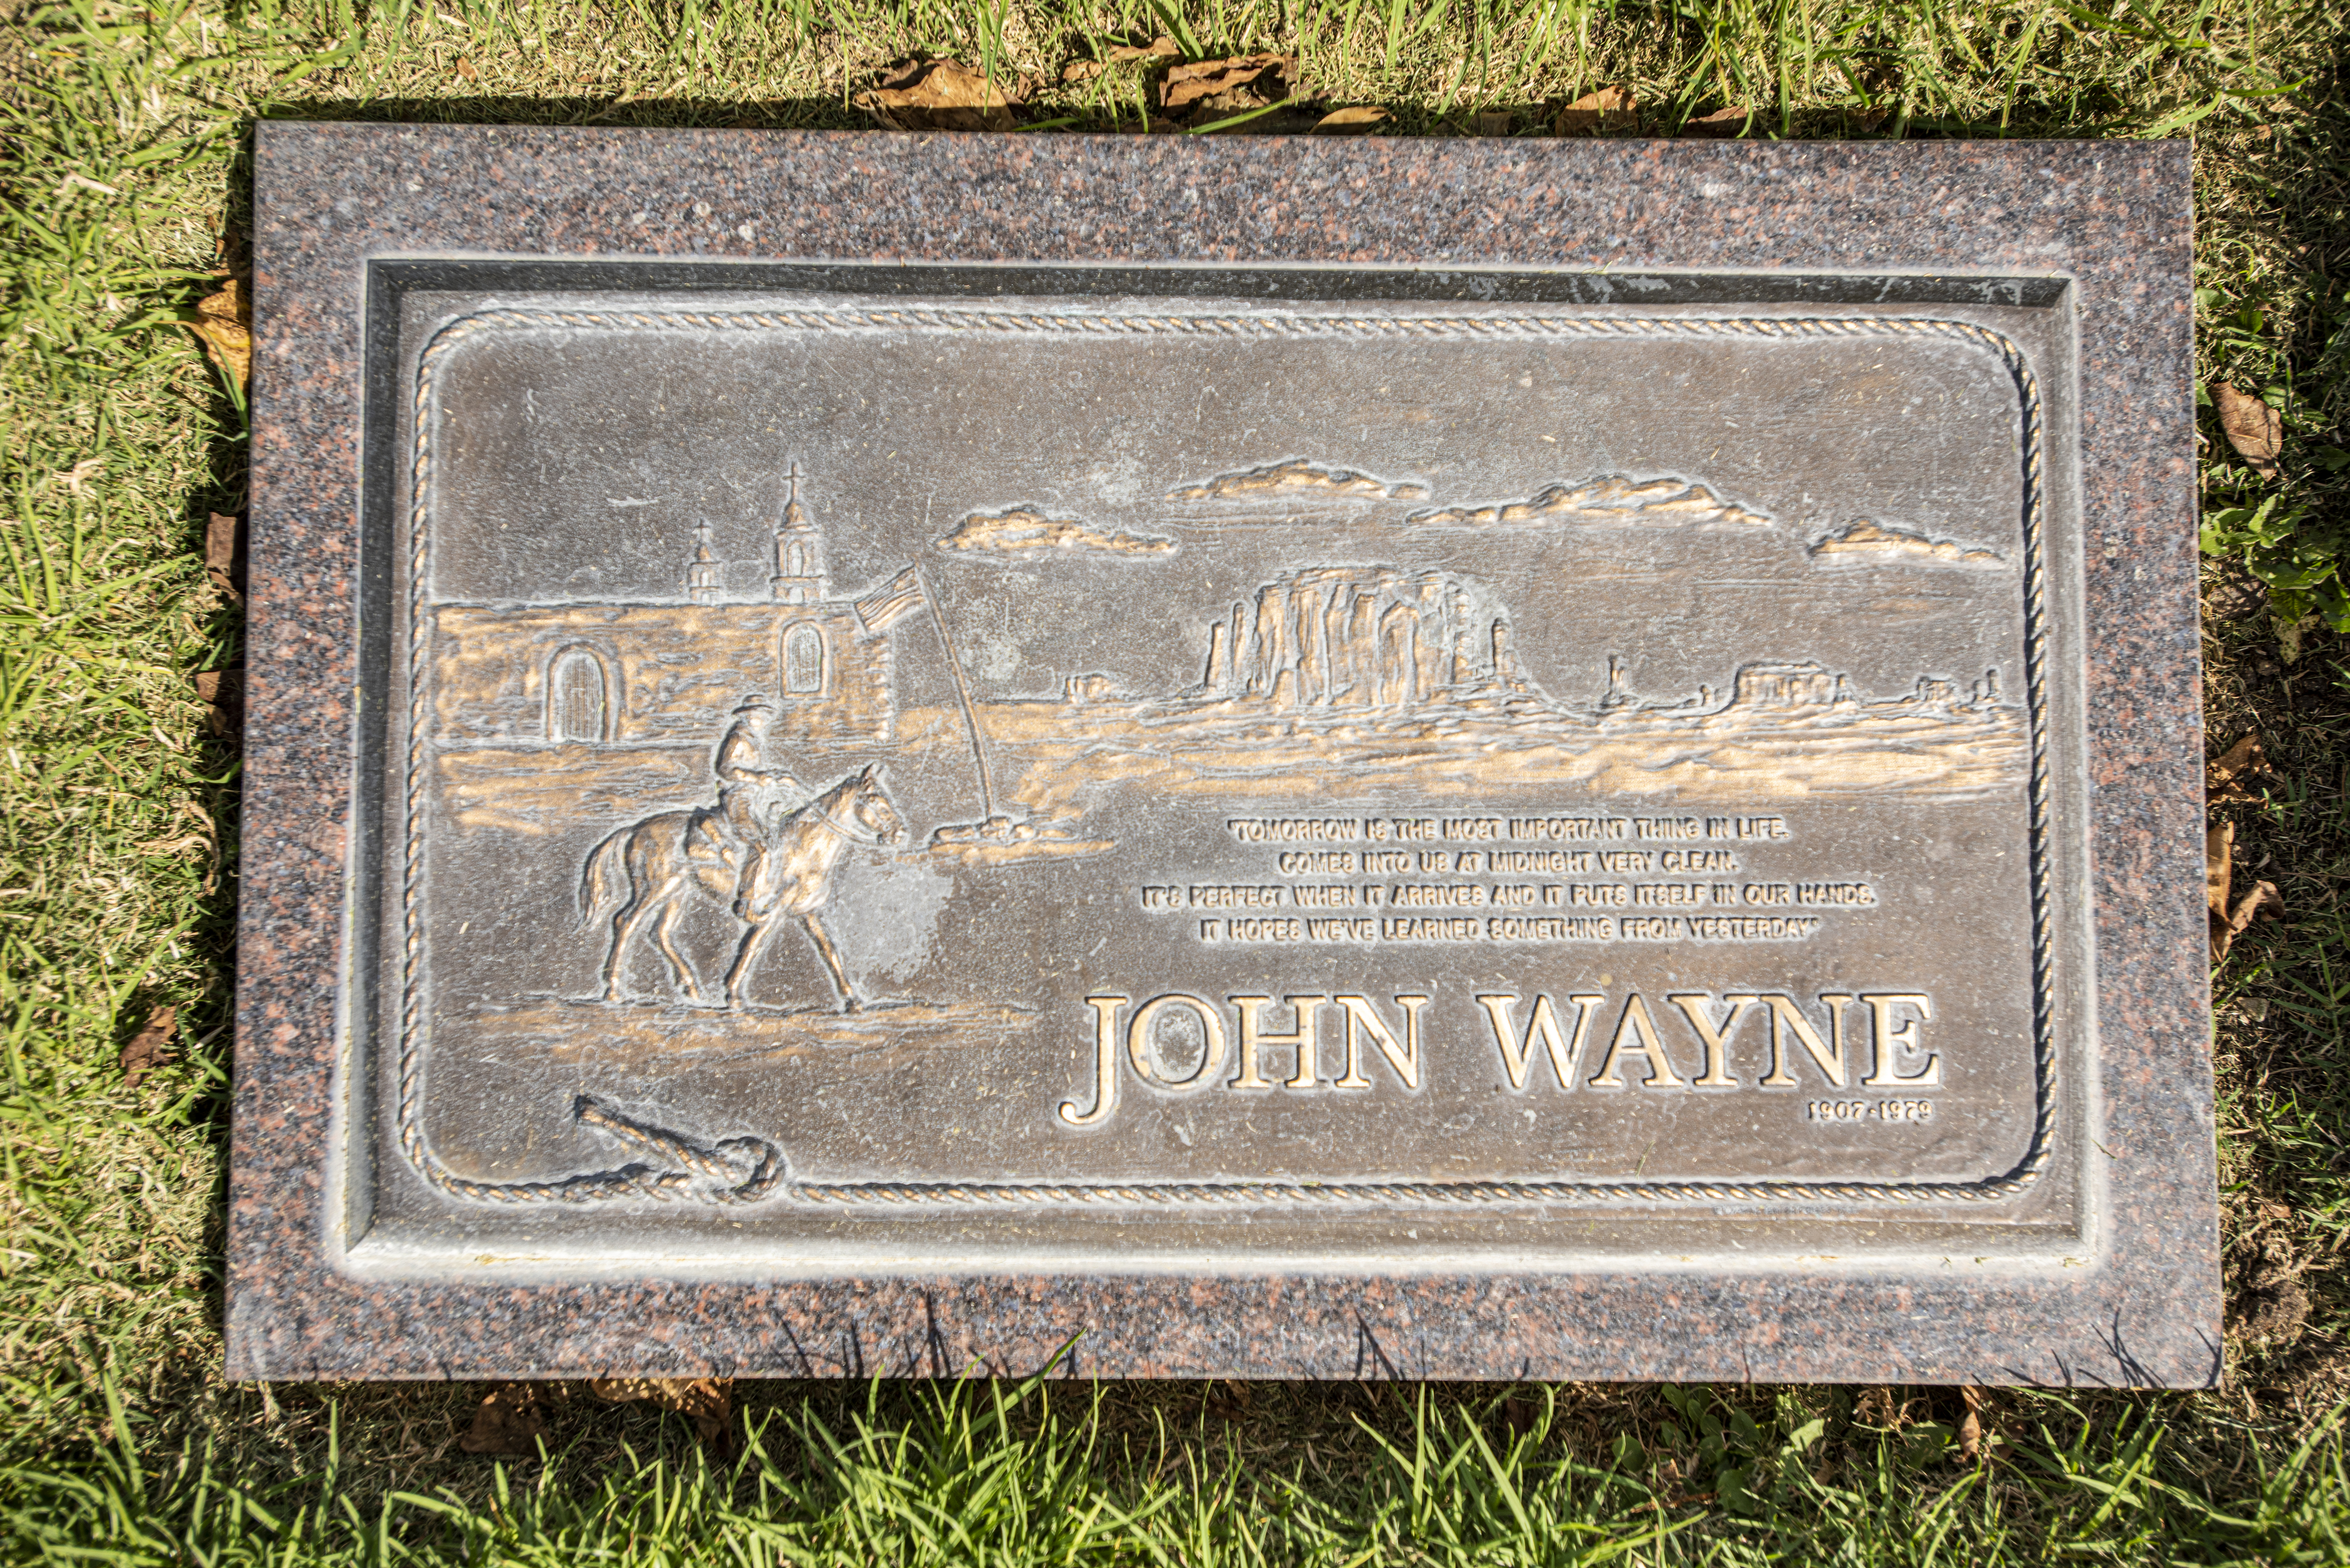 John Wayne gravesite at Pacific View Memorial Park and Mortuary in Newport Beach on September 25, 2019 | Source: Getty Images